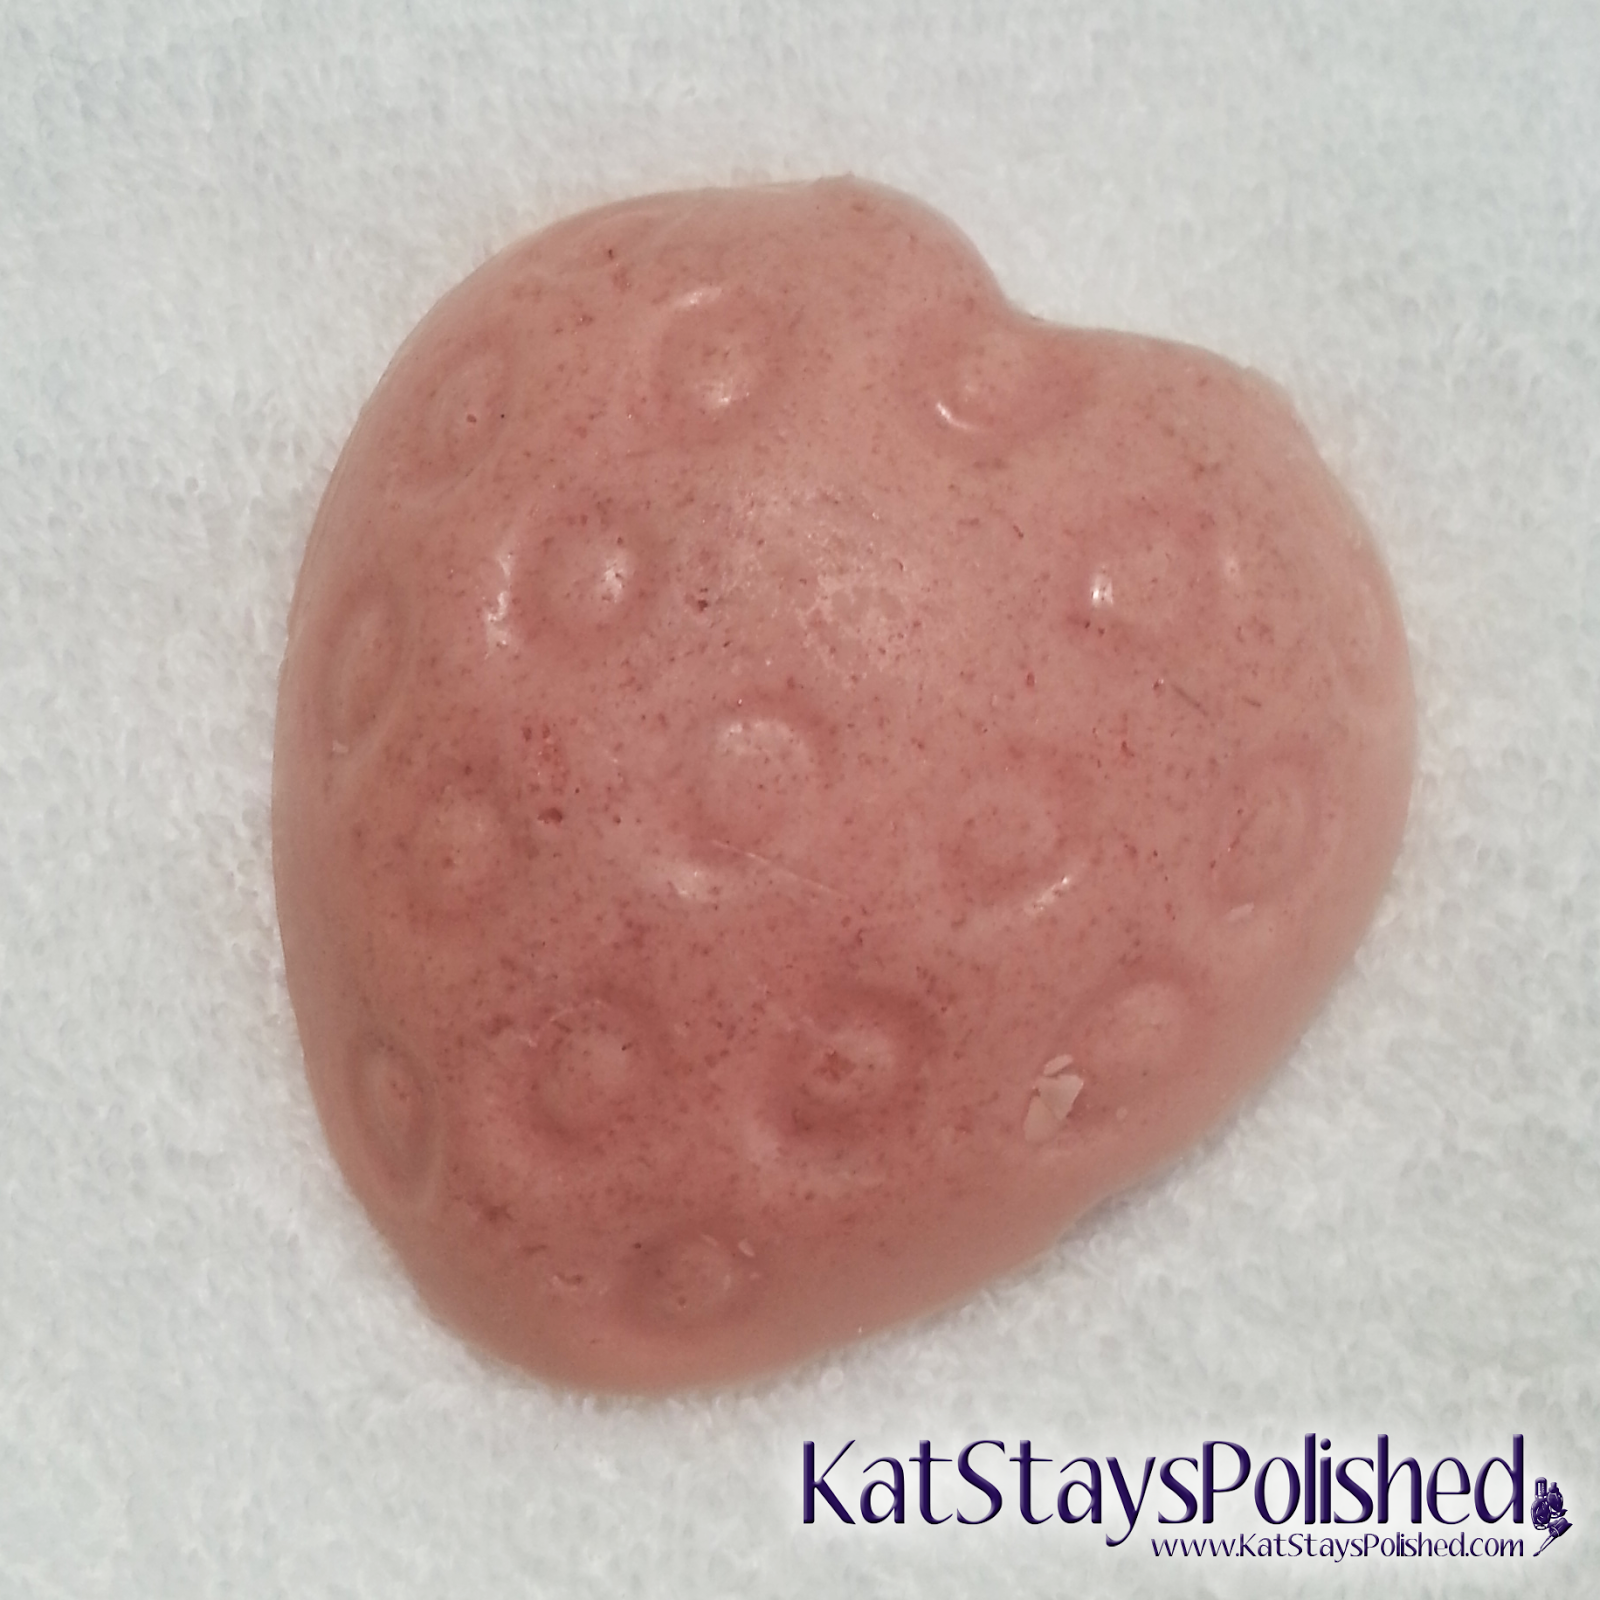 LUSH Mother's Day Treats - Strawberry Feels Forever Massage Bar - Strawberries and Cream Set | Kat Stays Polished